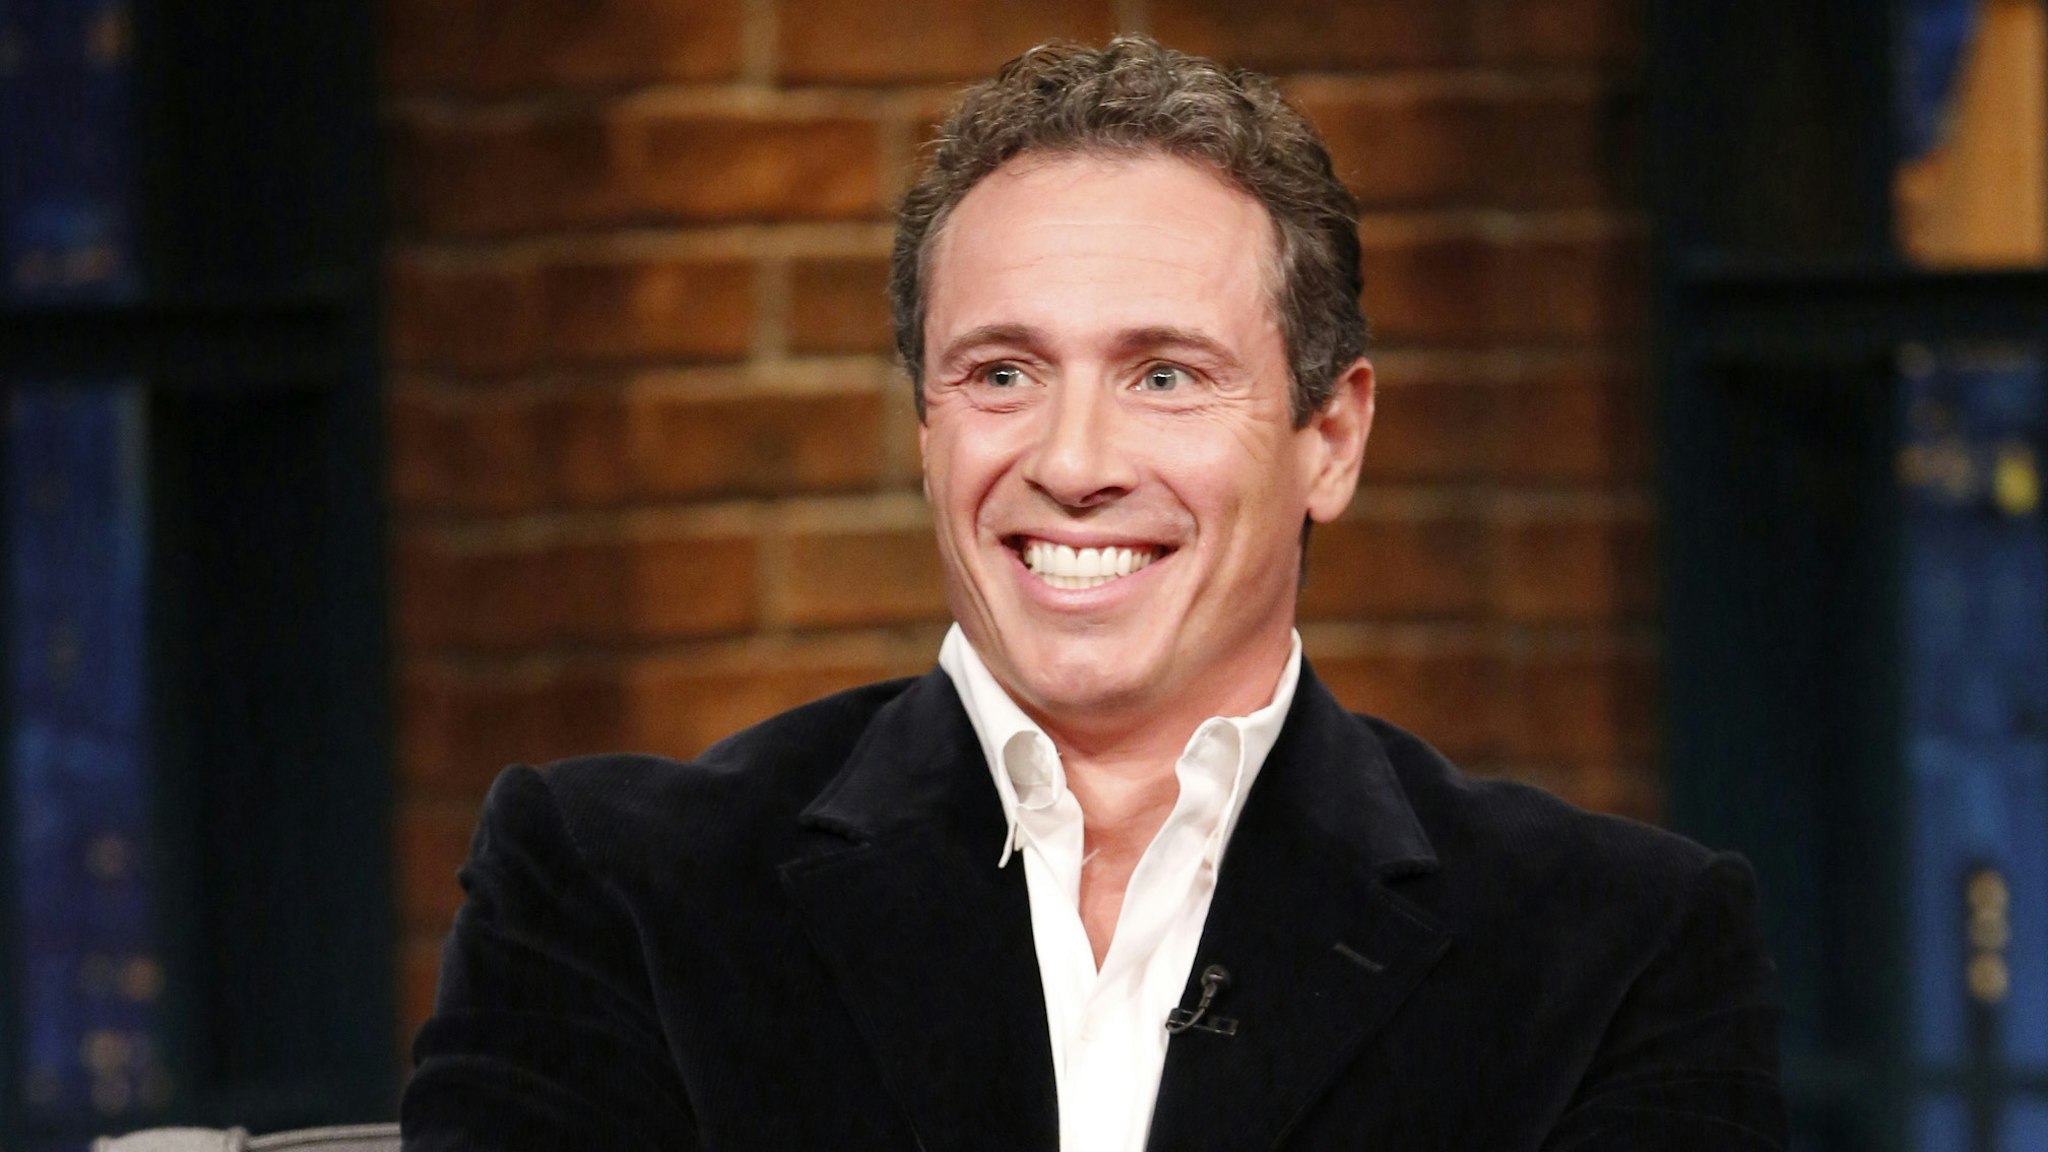 LATE NIGHT WITH SETH MEYERS -- Episode 613 -- Pictured: Journalist Chris Cuomo during an interview on November 22, 2017